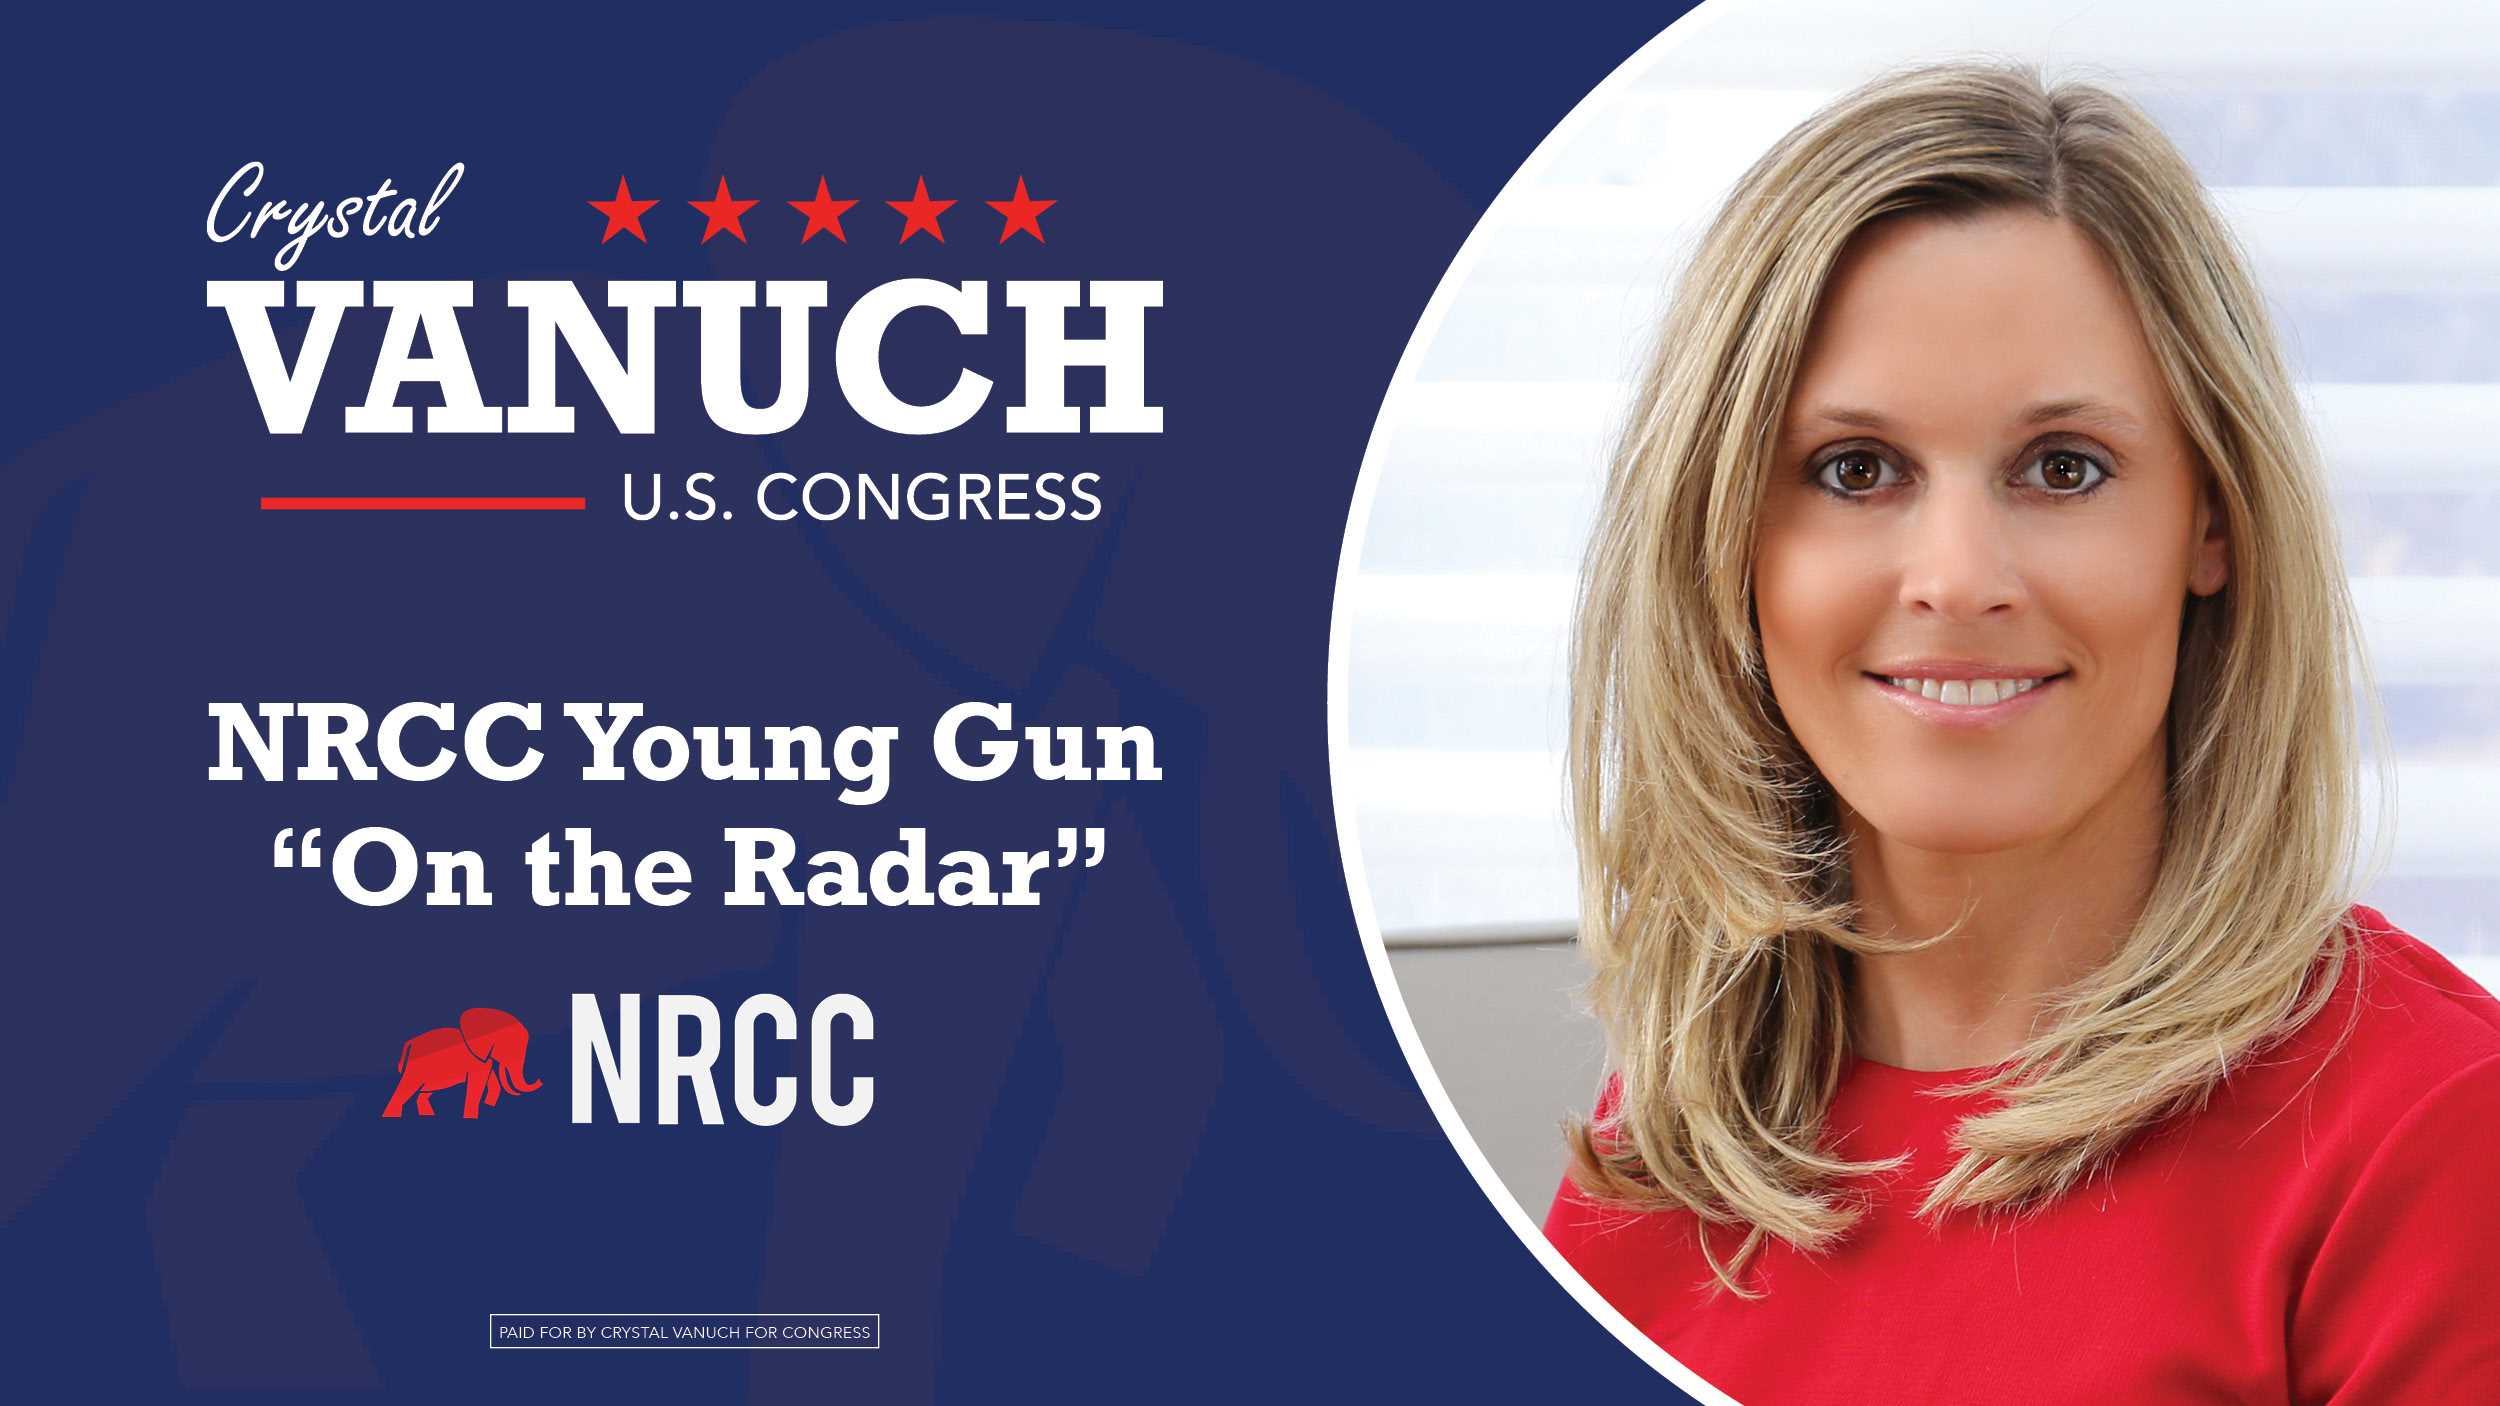 Featured image for “NRCC Announces Crystal Vanuch as “On the Radar” Candidate in Young Guns Program”